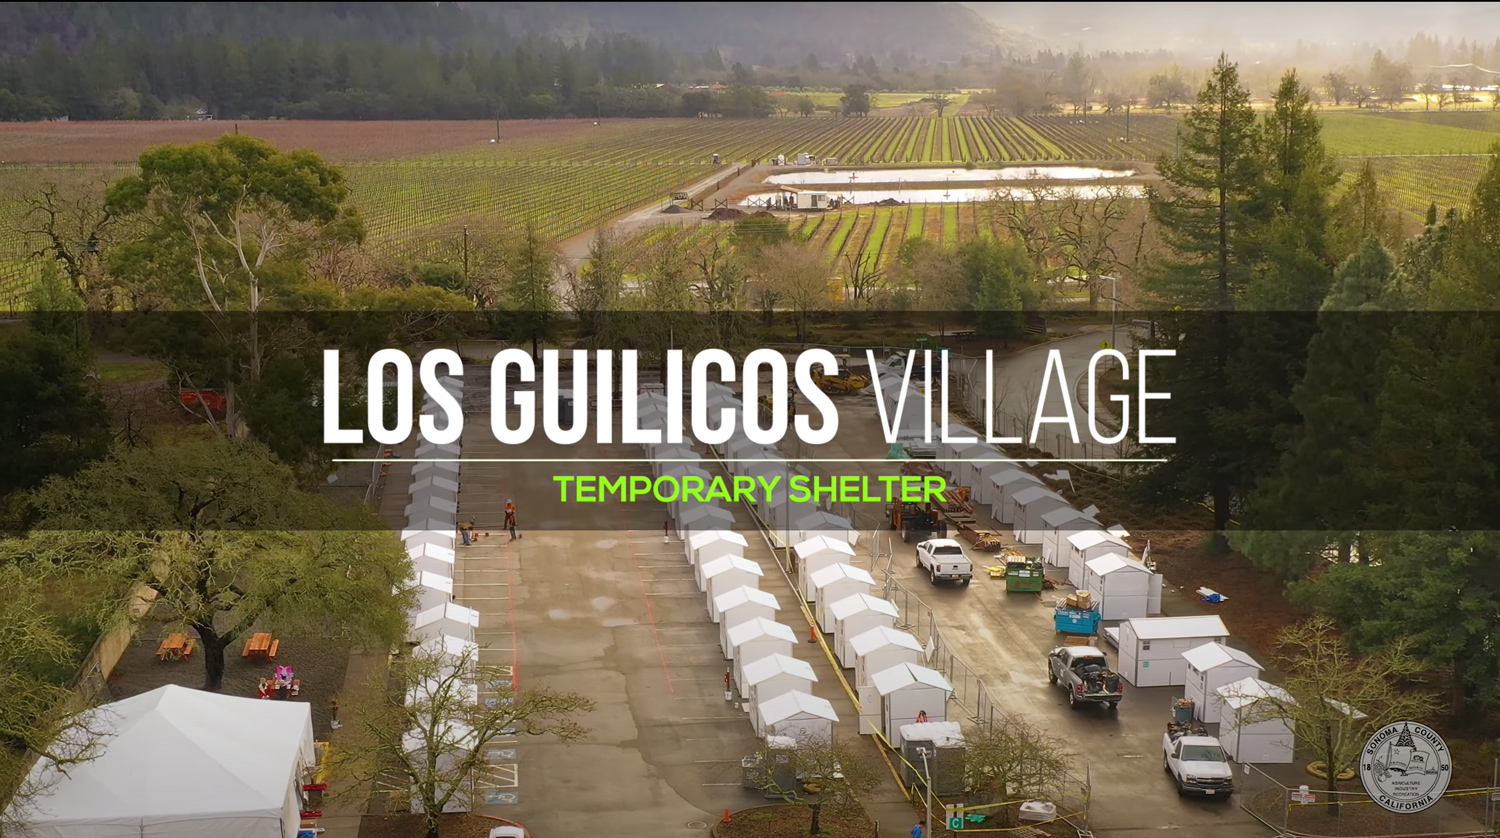 Small buildings lined up displaying the temporary shelter. Text: Los Guilicos Village, Temporary shelter